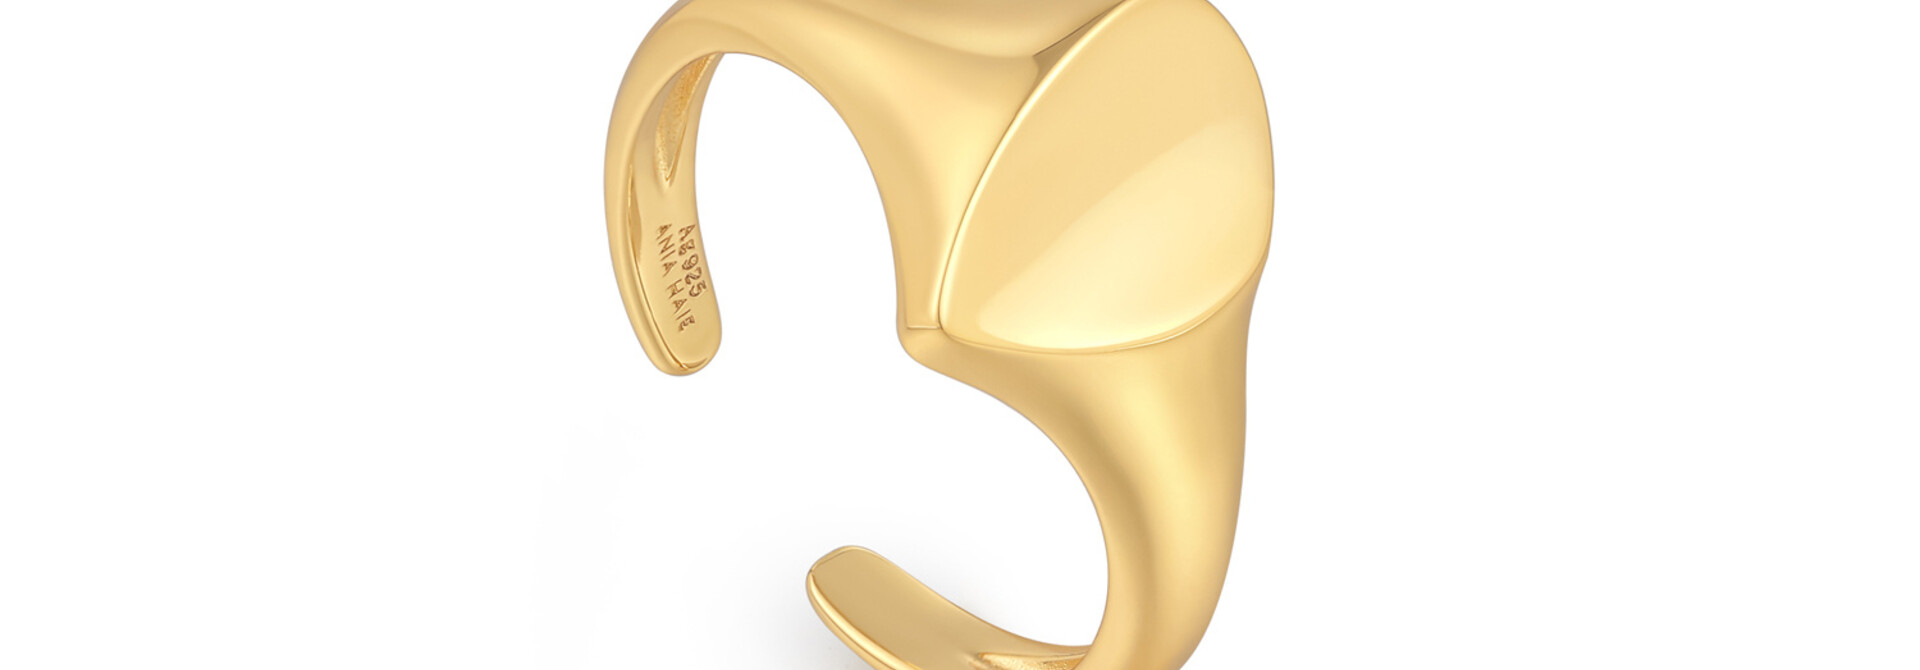 Arrow Adjustable Signet Ring  - Gold plated